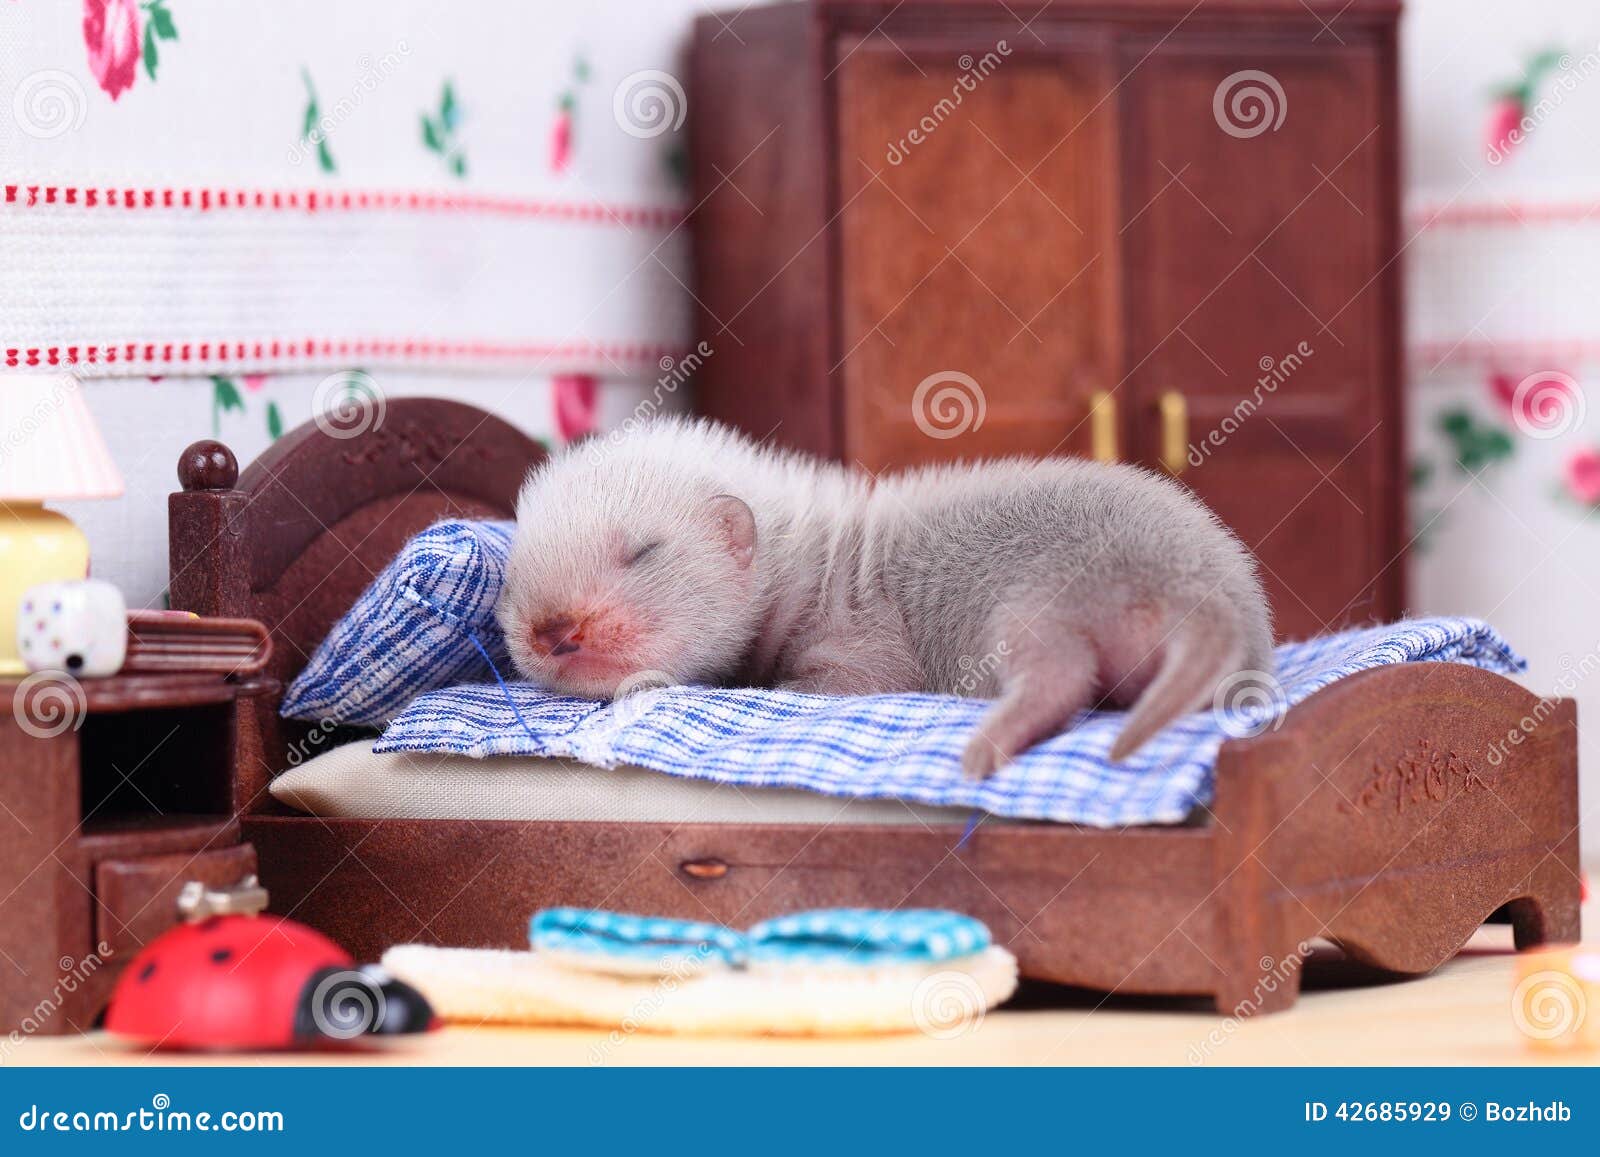 ferret baby in doll house